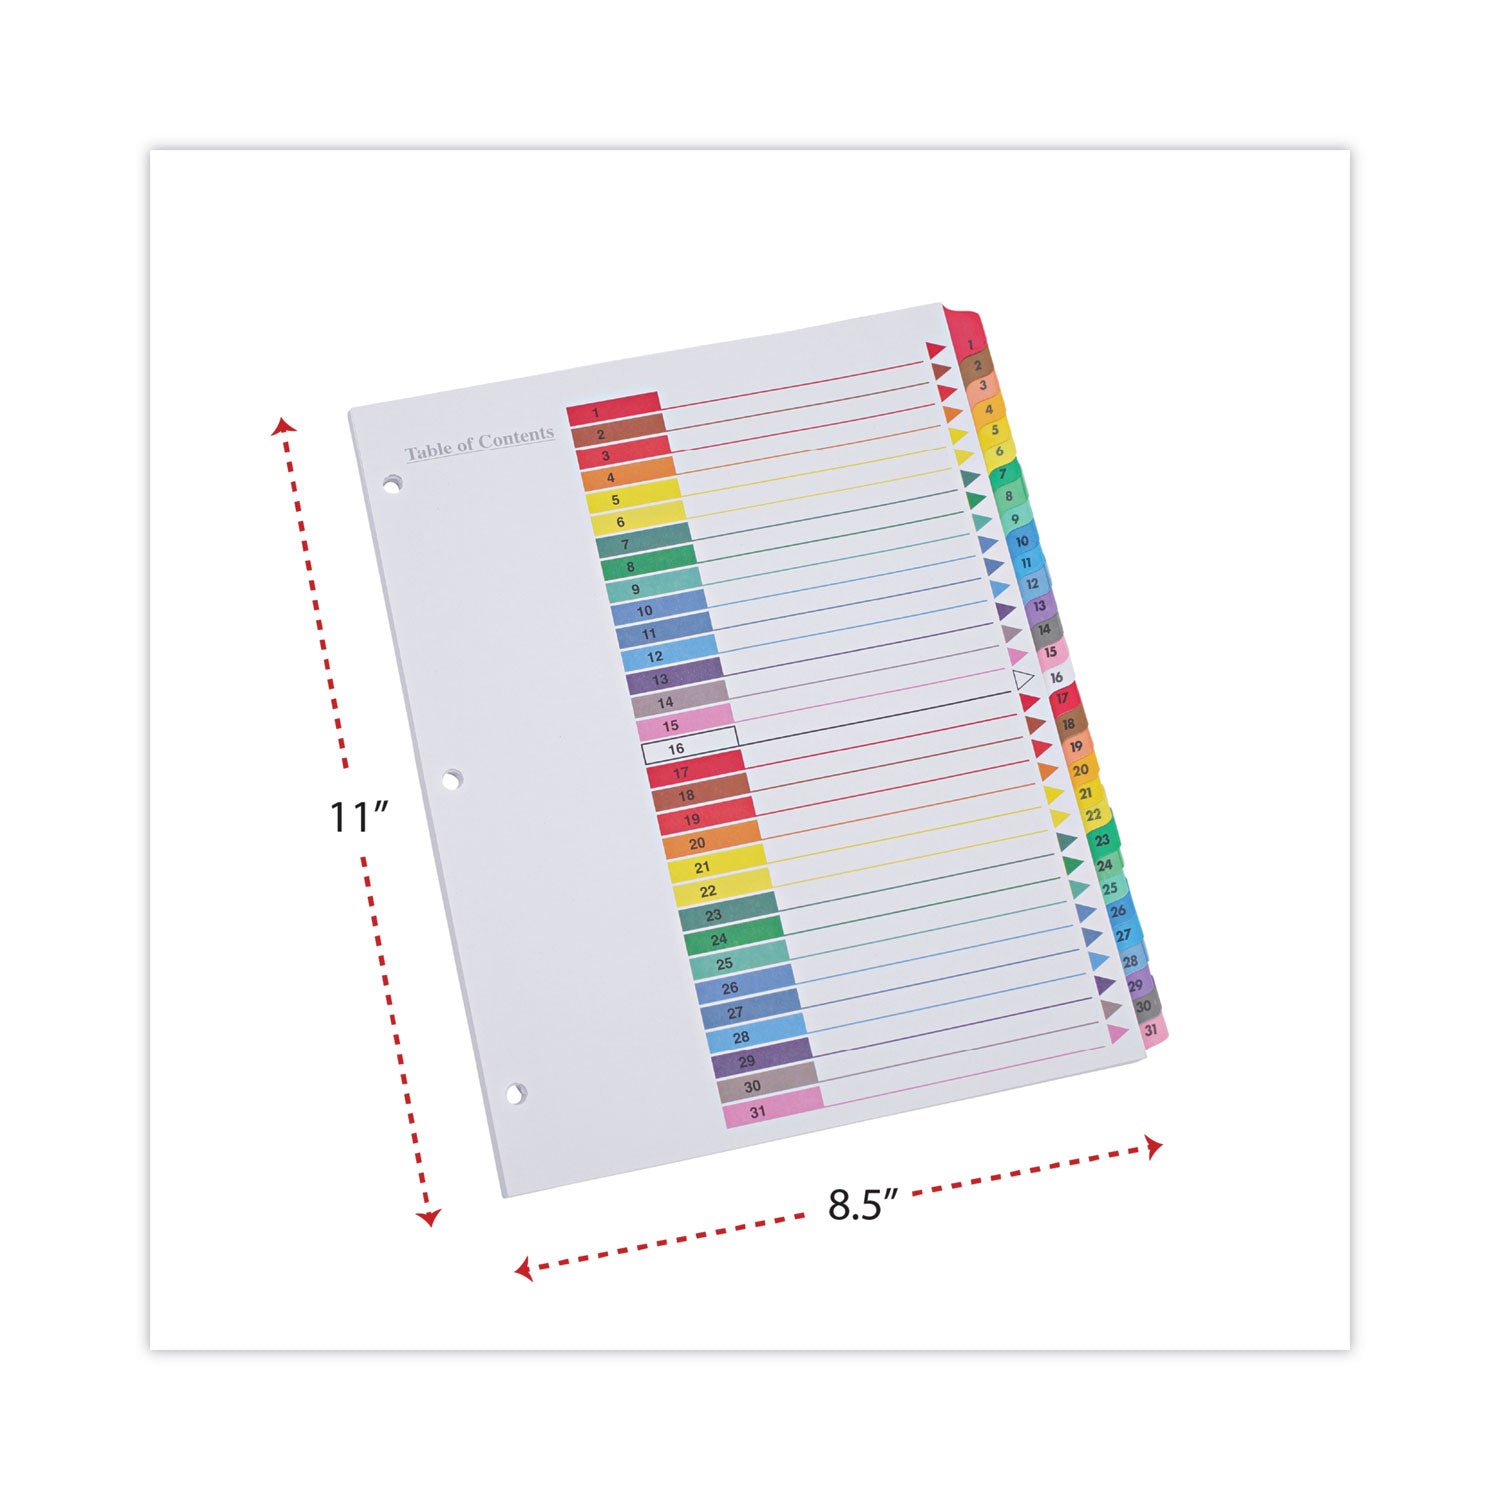 Deluxe Table of Contents Dividers for Printers, 31-Tab, 1 to 31, 11 x 8.5, White, 1 Set - 